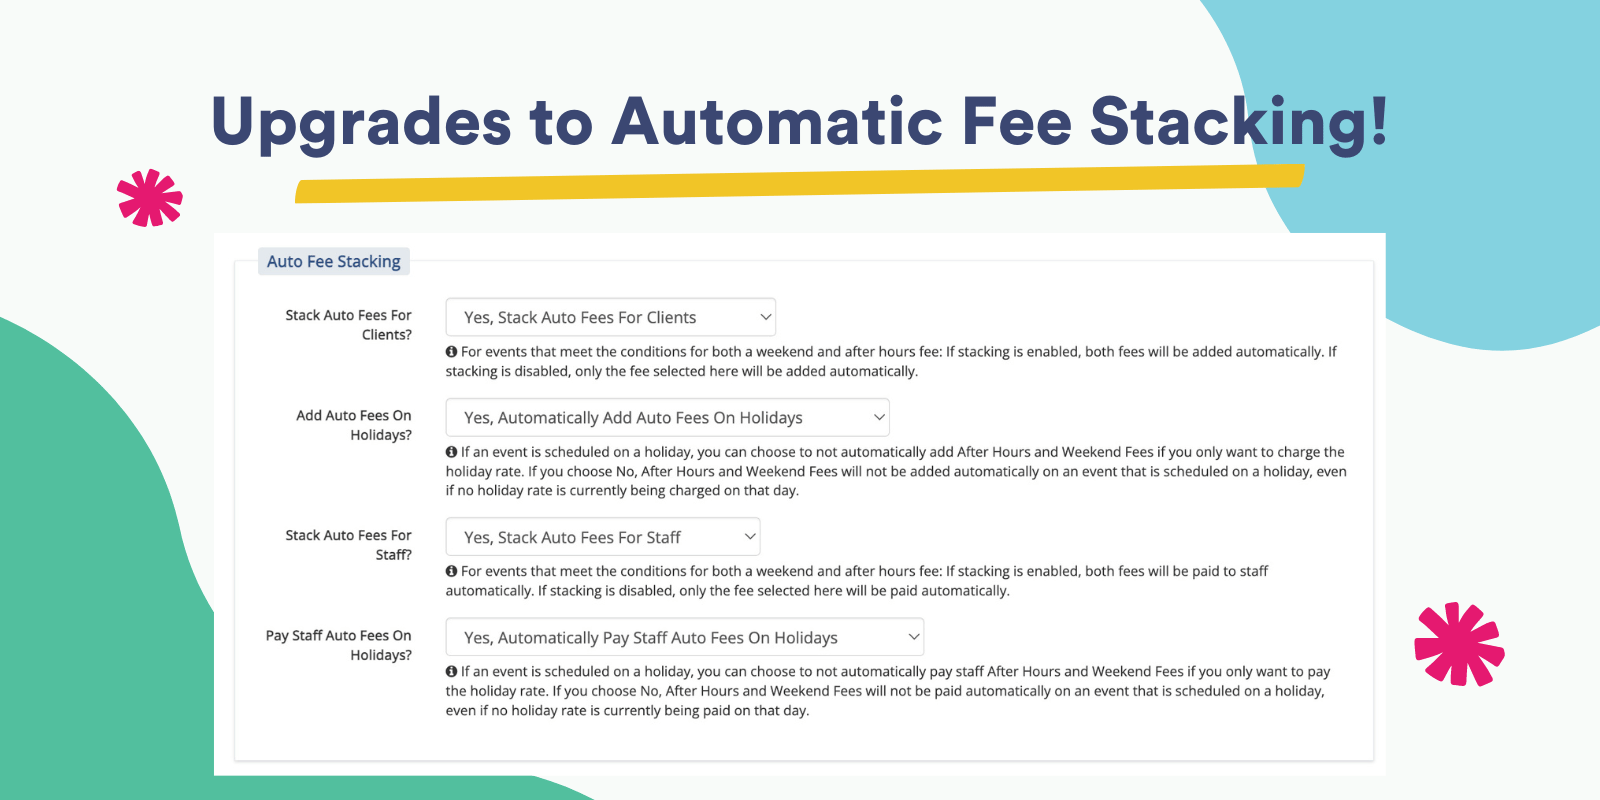 auto-fee-stacking-summary.png